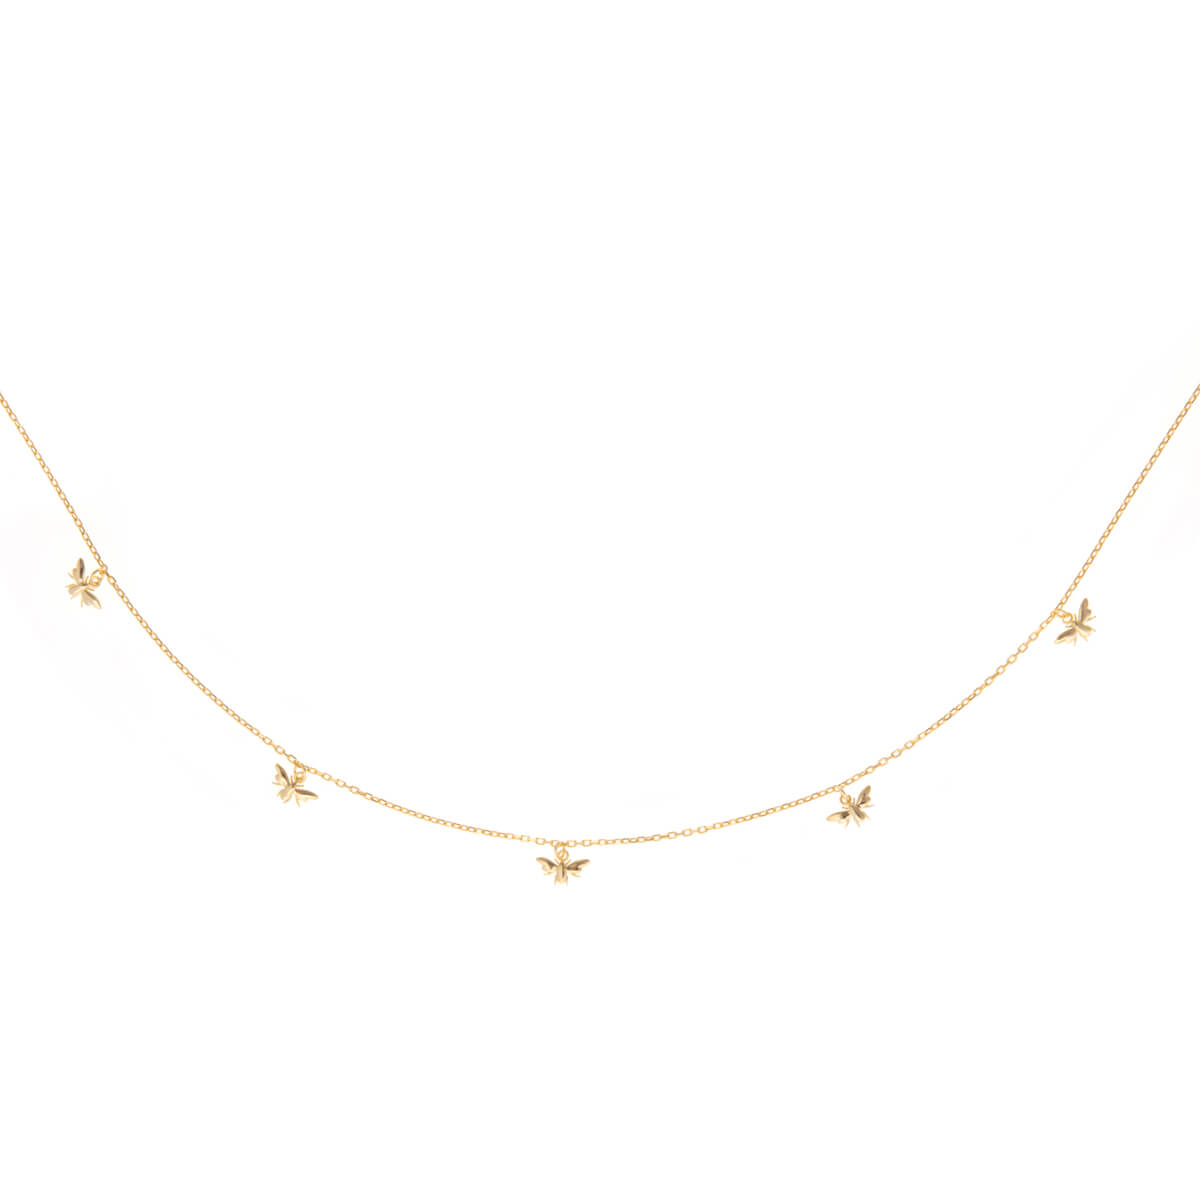 Bees Gold Plated Charm Necklace